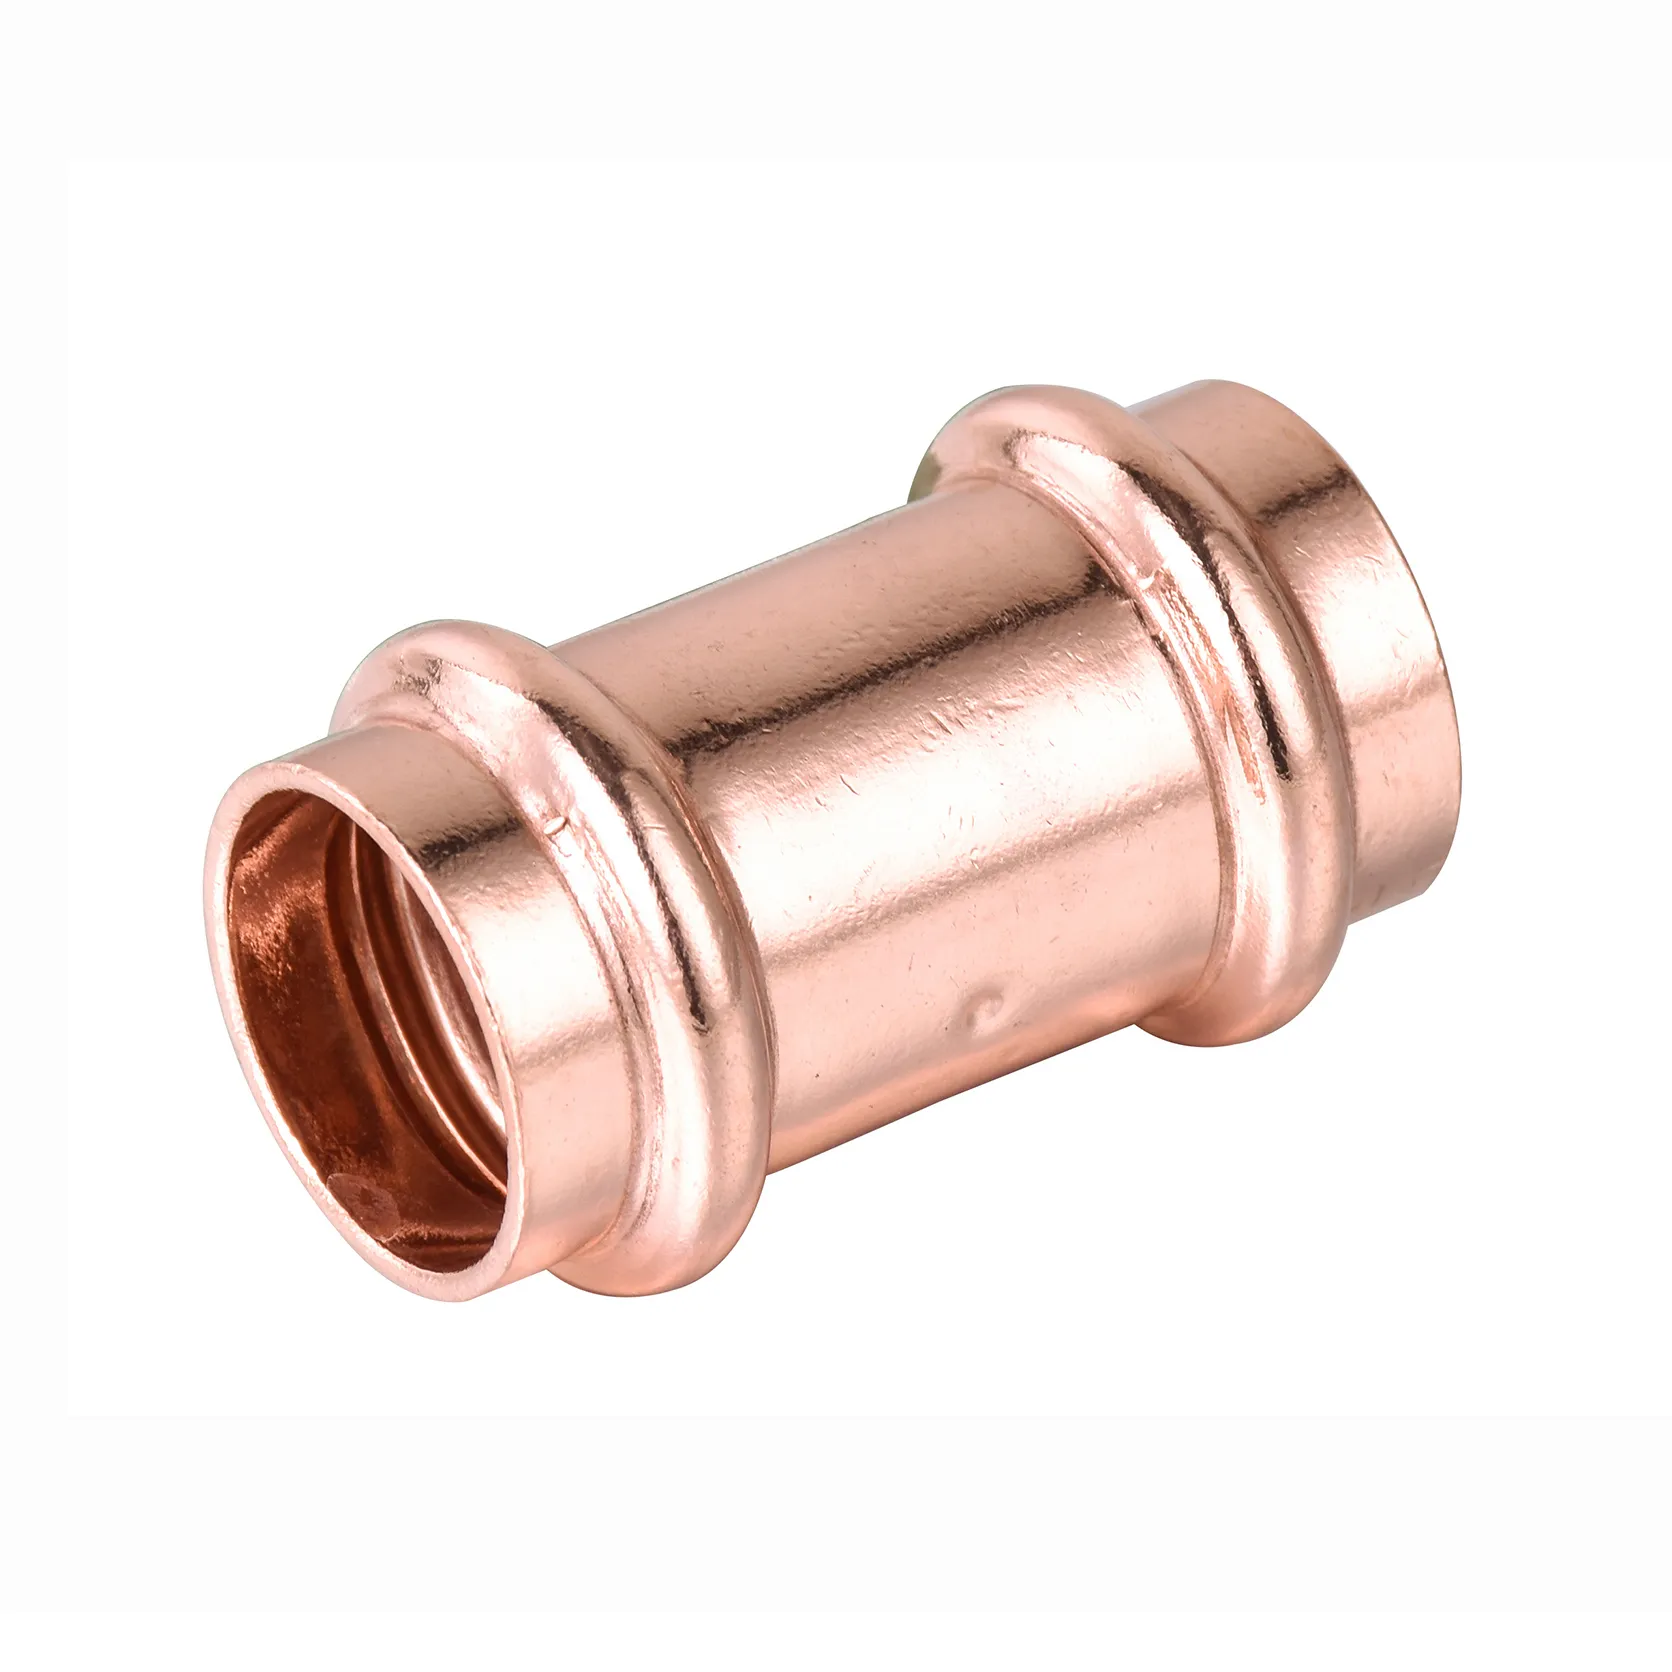 coupling with stop  copper press fitting match rigid and milwauke's tool from  1/2" to  4" ASTM B88